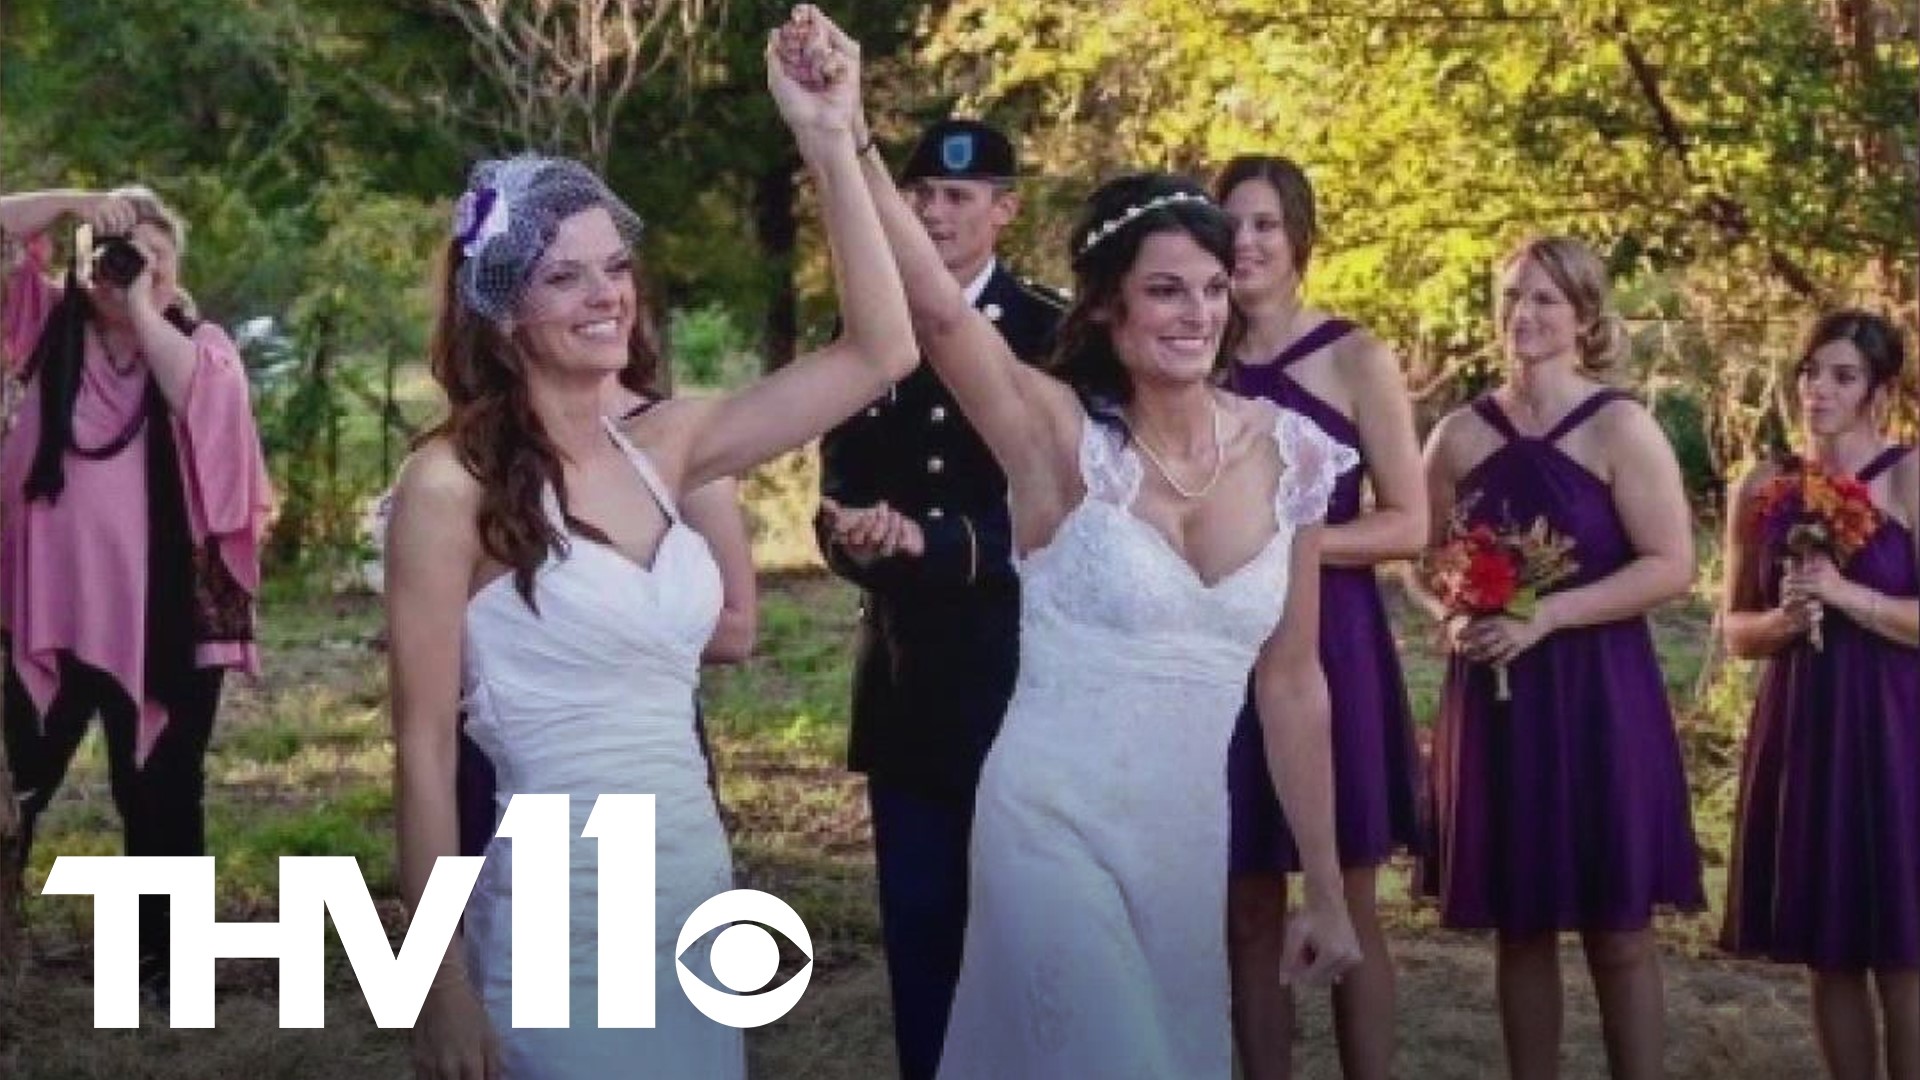 Jennifer and Kristin Seaton-Rambo have been married for eight years. They remember the day they made history at a Eureka Springs courthouse by being the first.